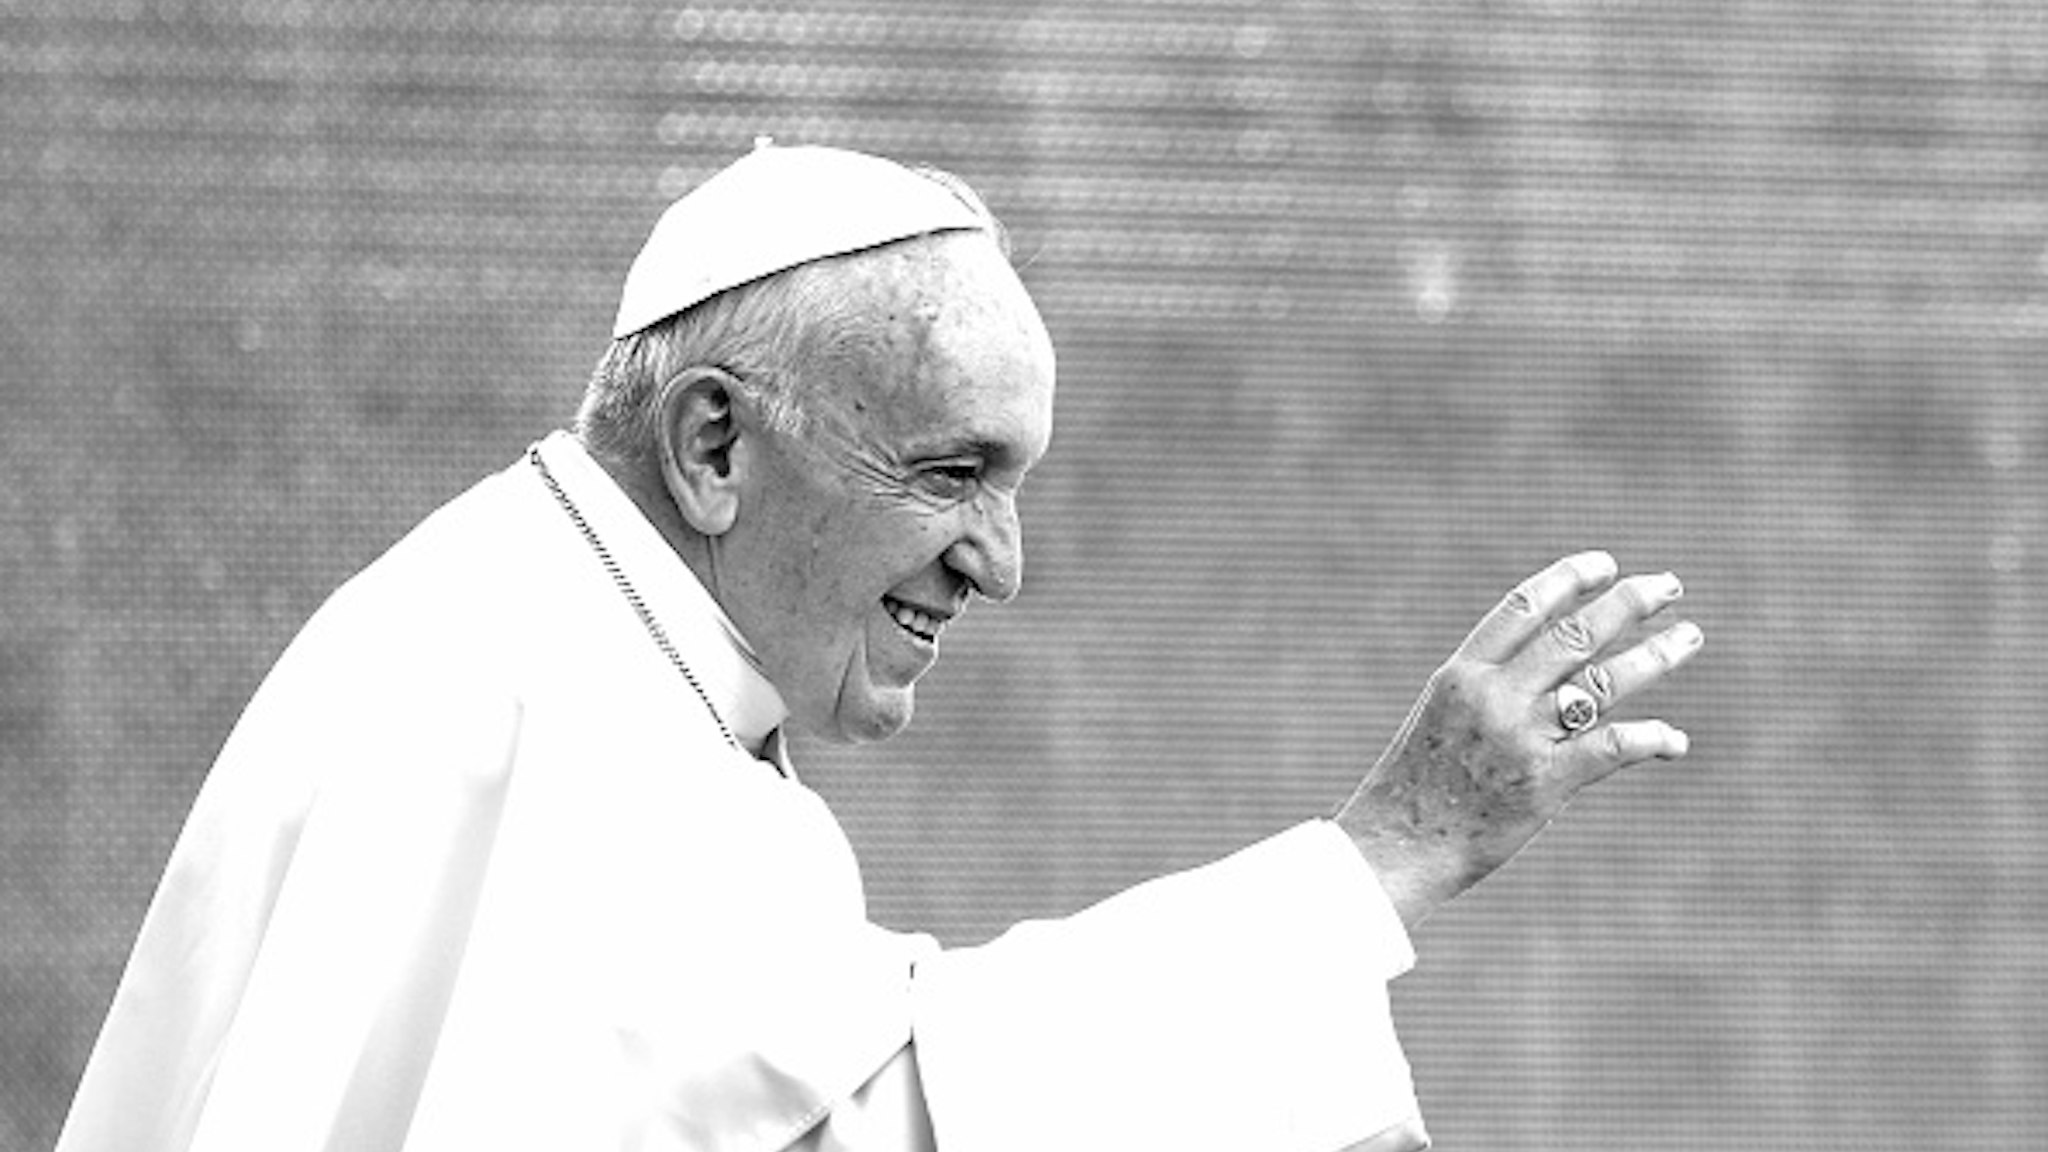 VATICAN CITY, VATICAN - SEPTEMBER 11: (EDITORS NOTE: This image has been converted in black and white) Pope Francis waves to the faithful as he arrives in St. Peter's square for his weekly Audience at The Vatican on September 11, 2019 in Vatican City, Vatican.